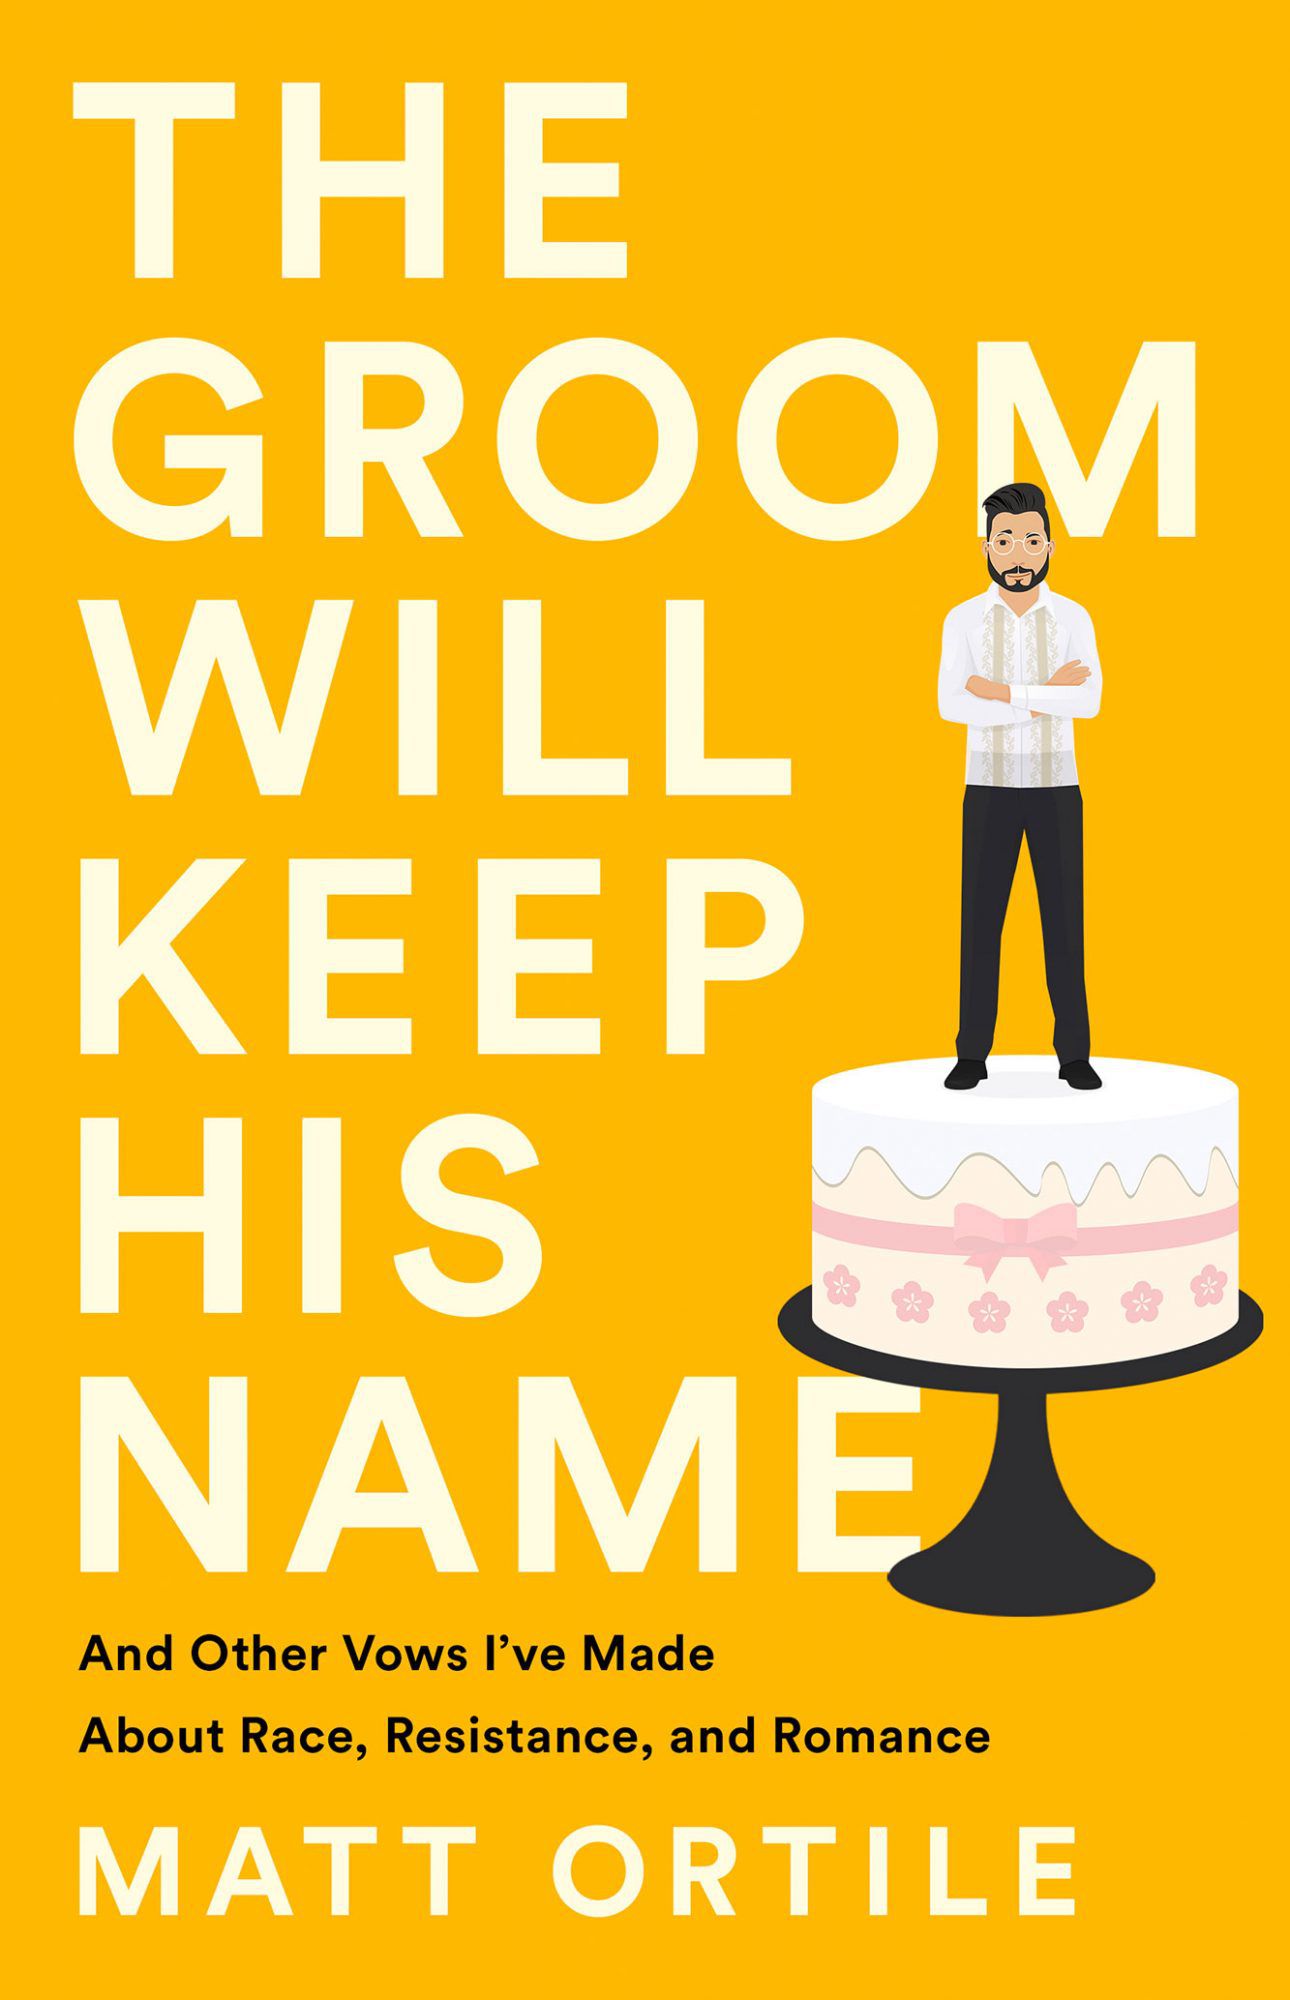 The Groom Will Keep His Name by Matt Ortile